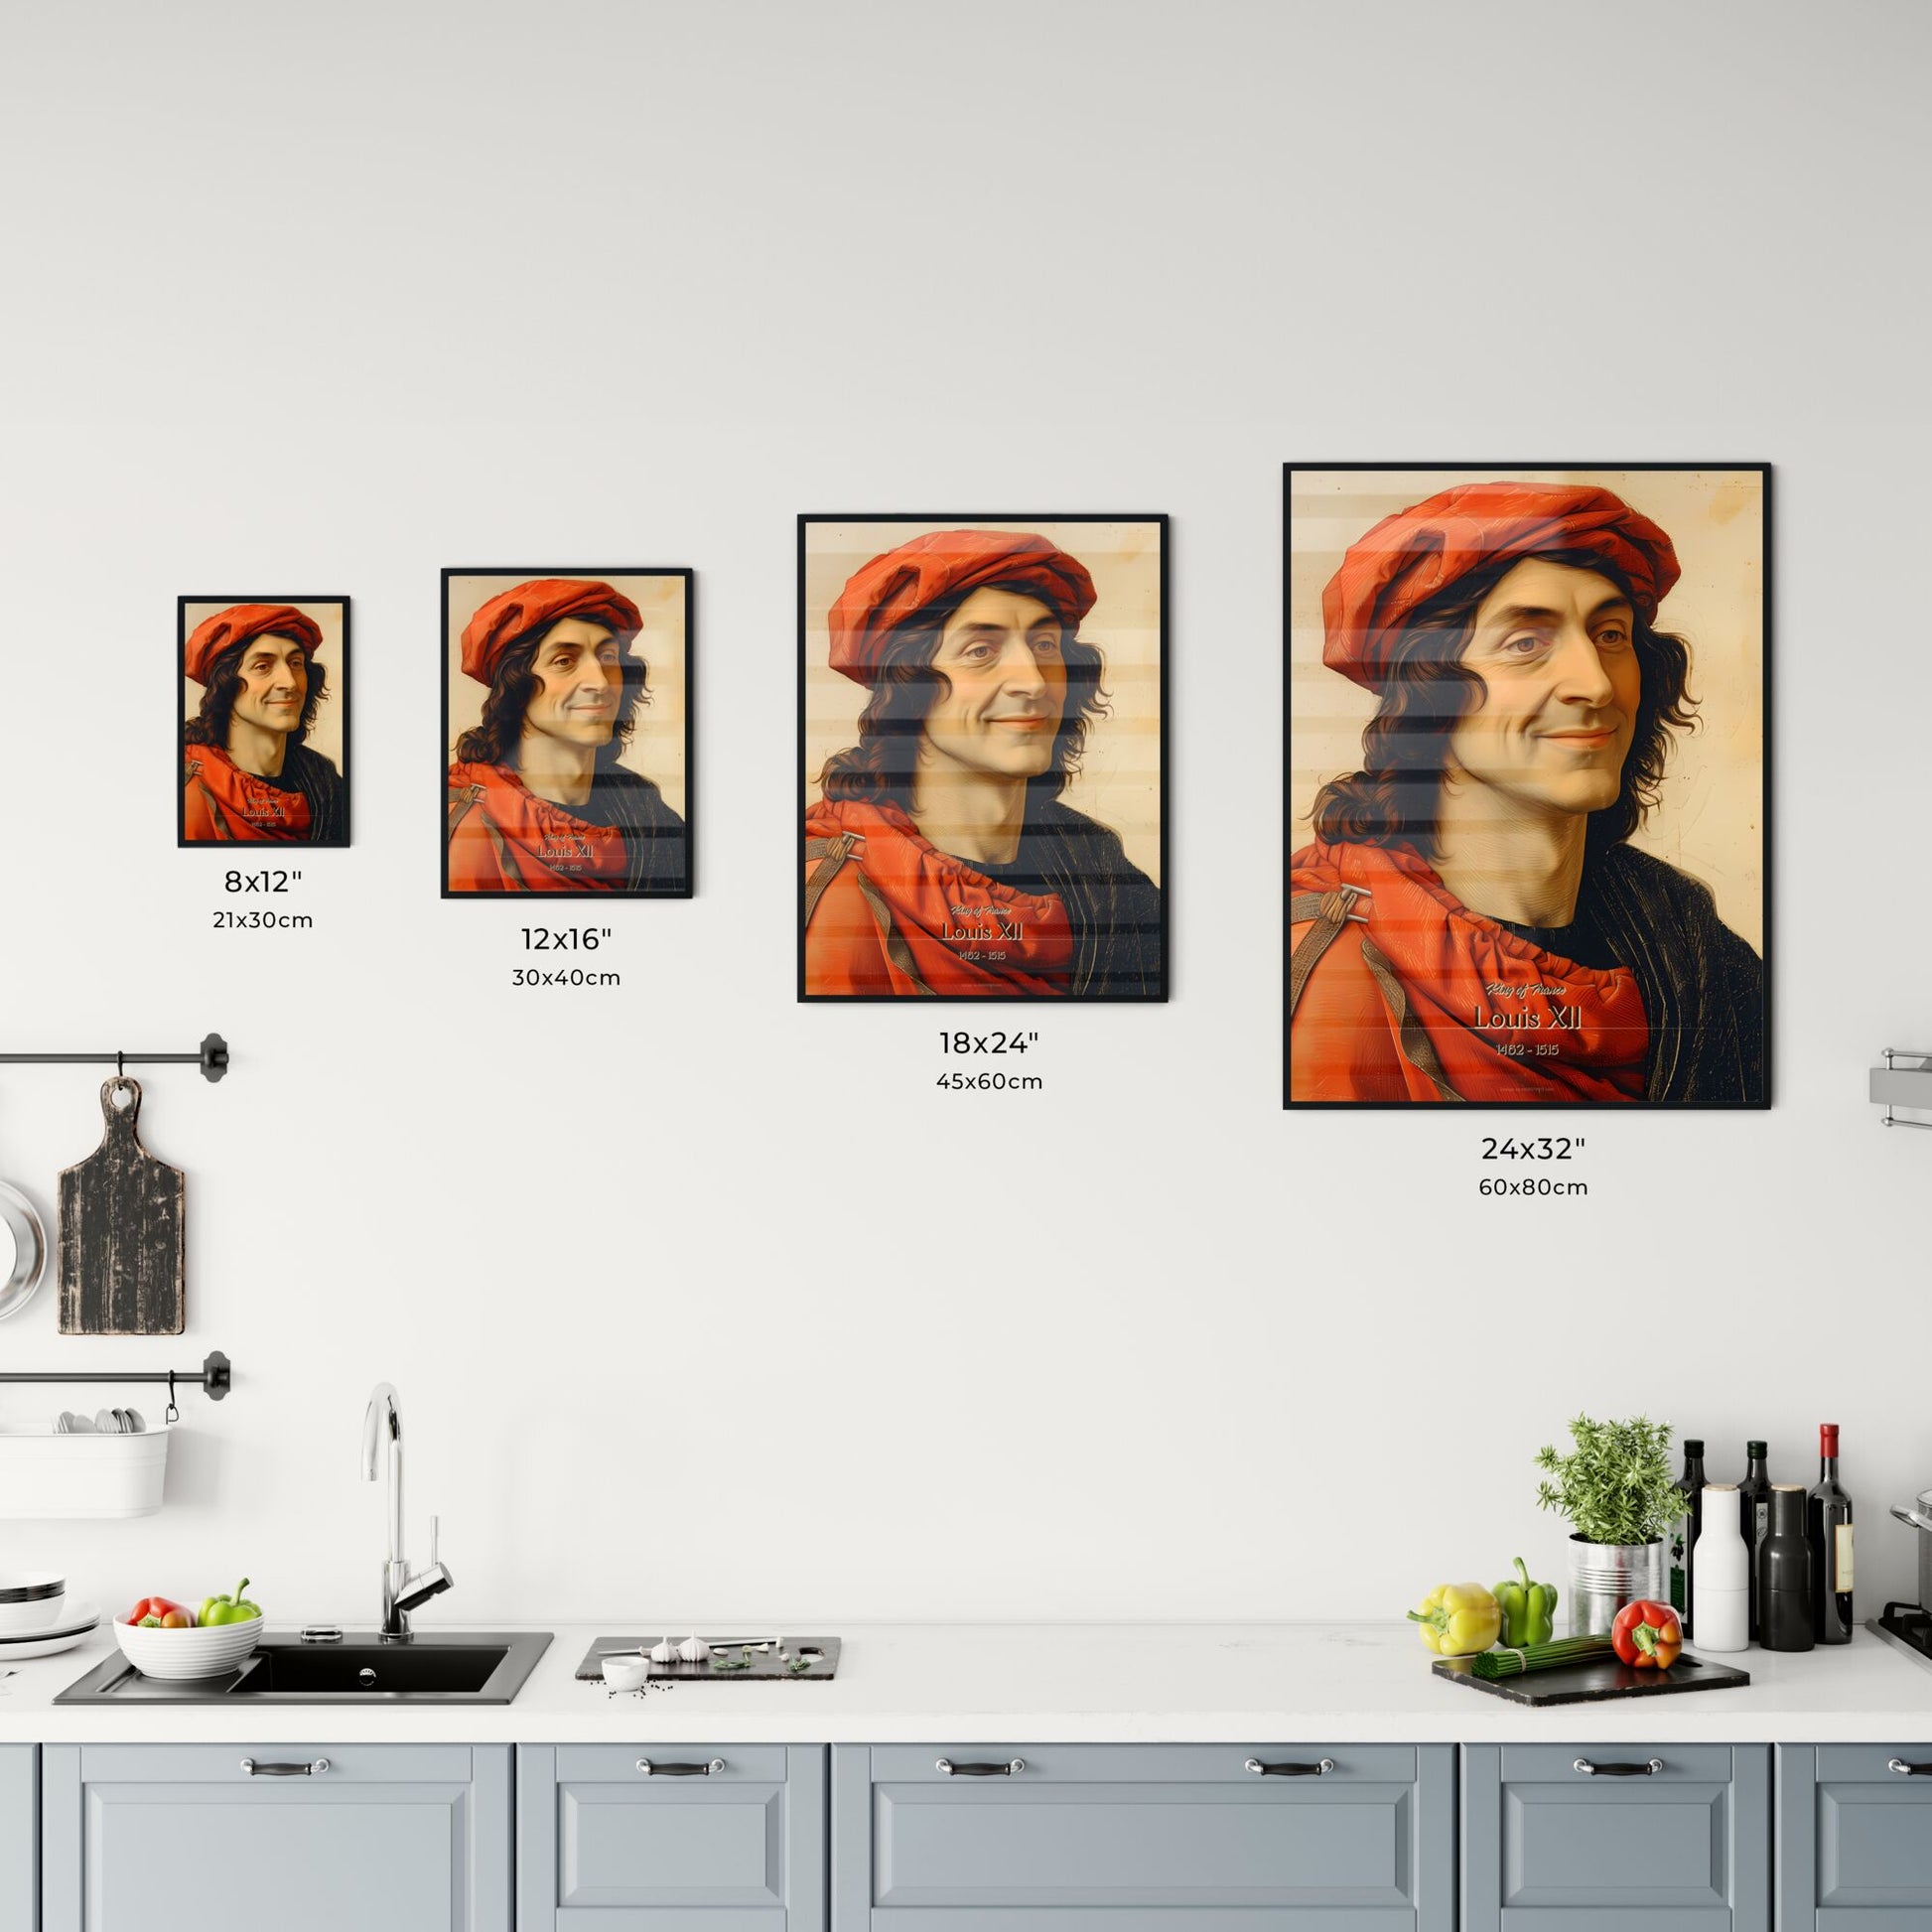 King of France, Louis XII, 1462 - 1515, A Poster of a painting of a man wearing a red hat Default Title